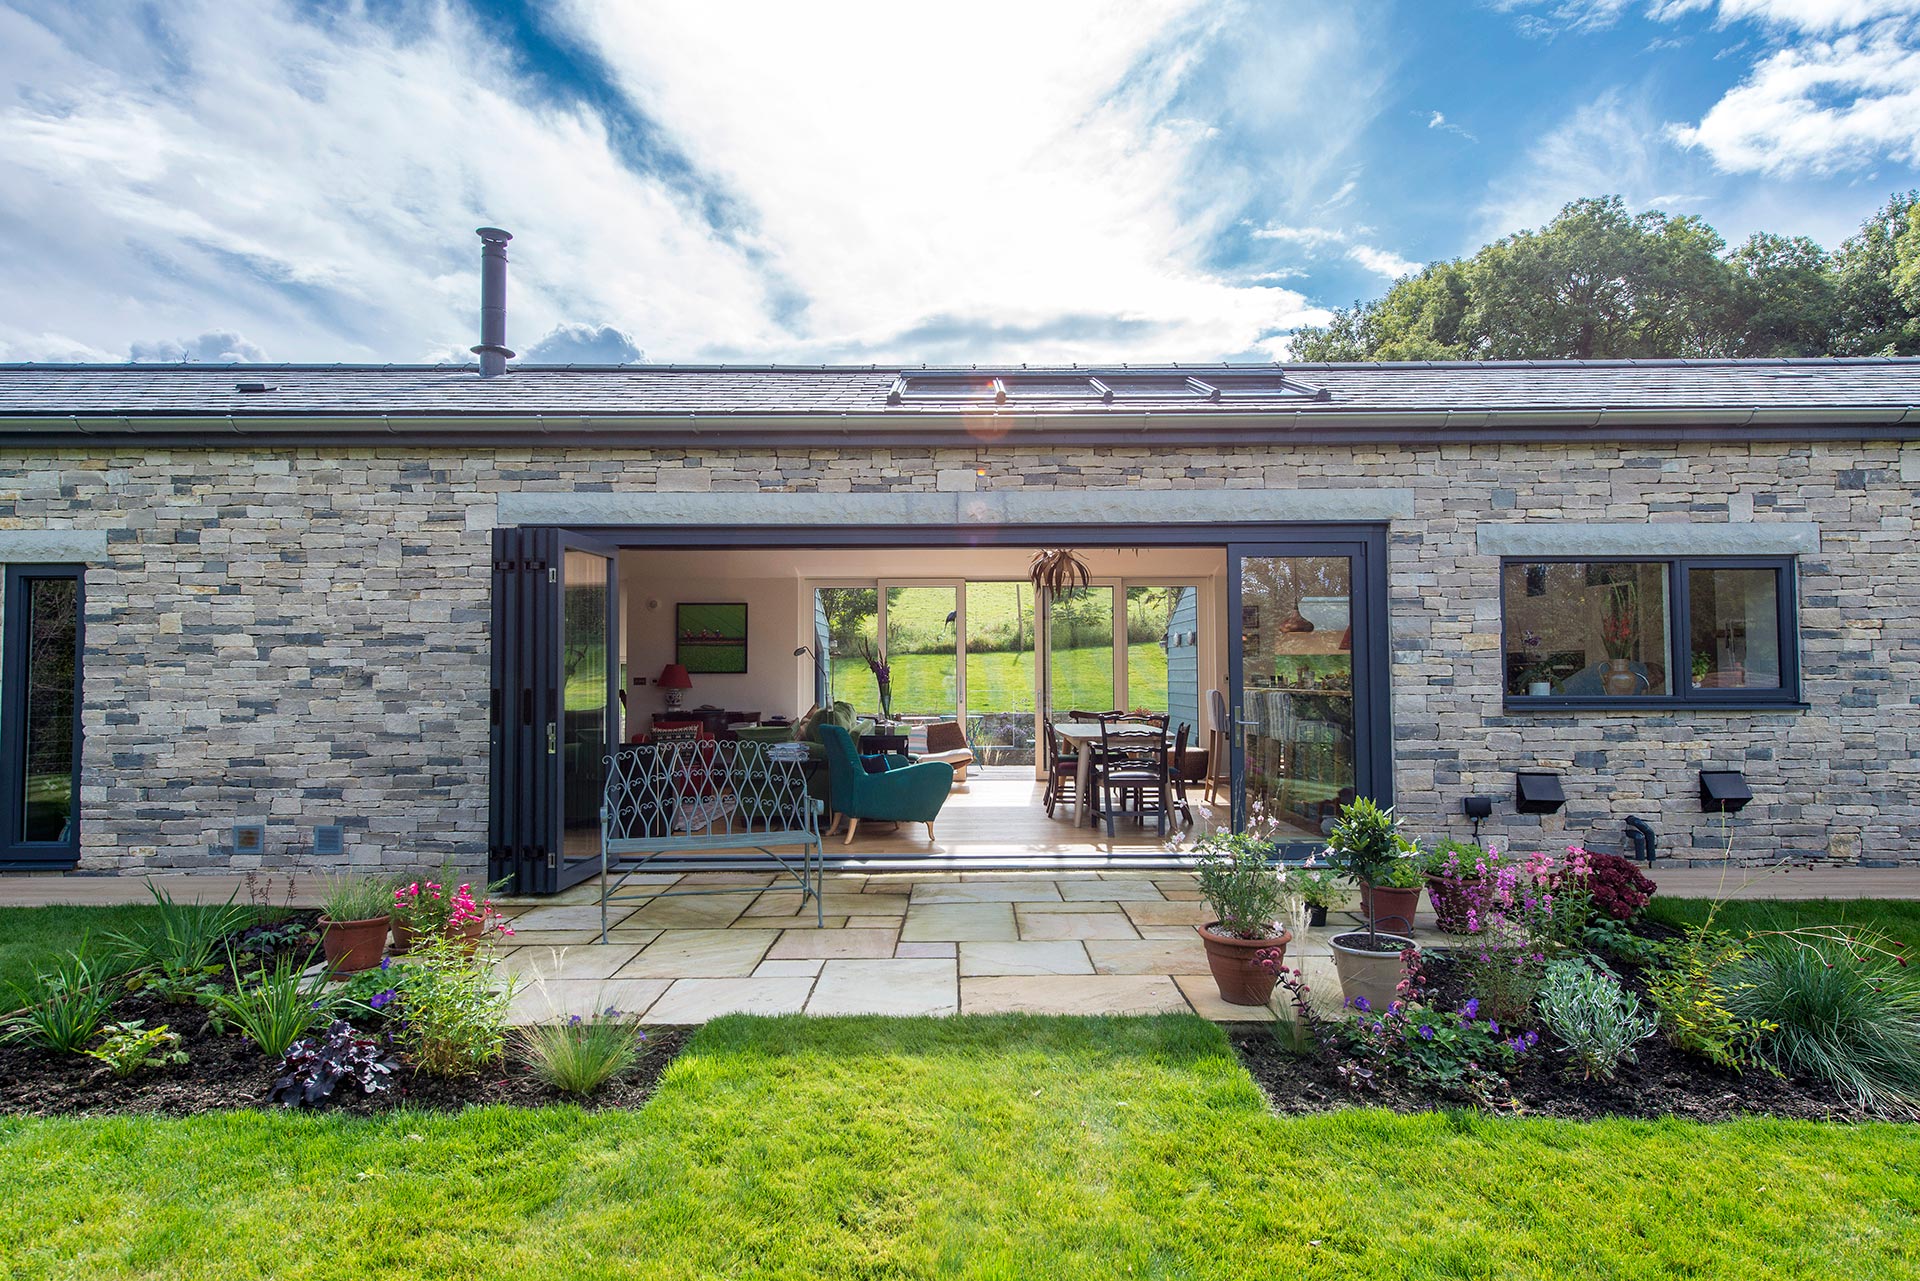 single storey stone house with large glass sliding doors leading onto patio and lawn garden